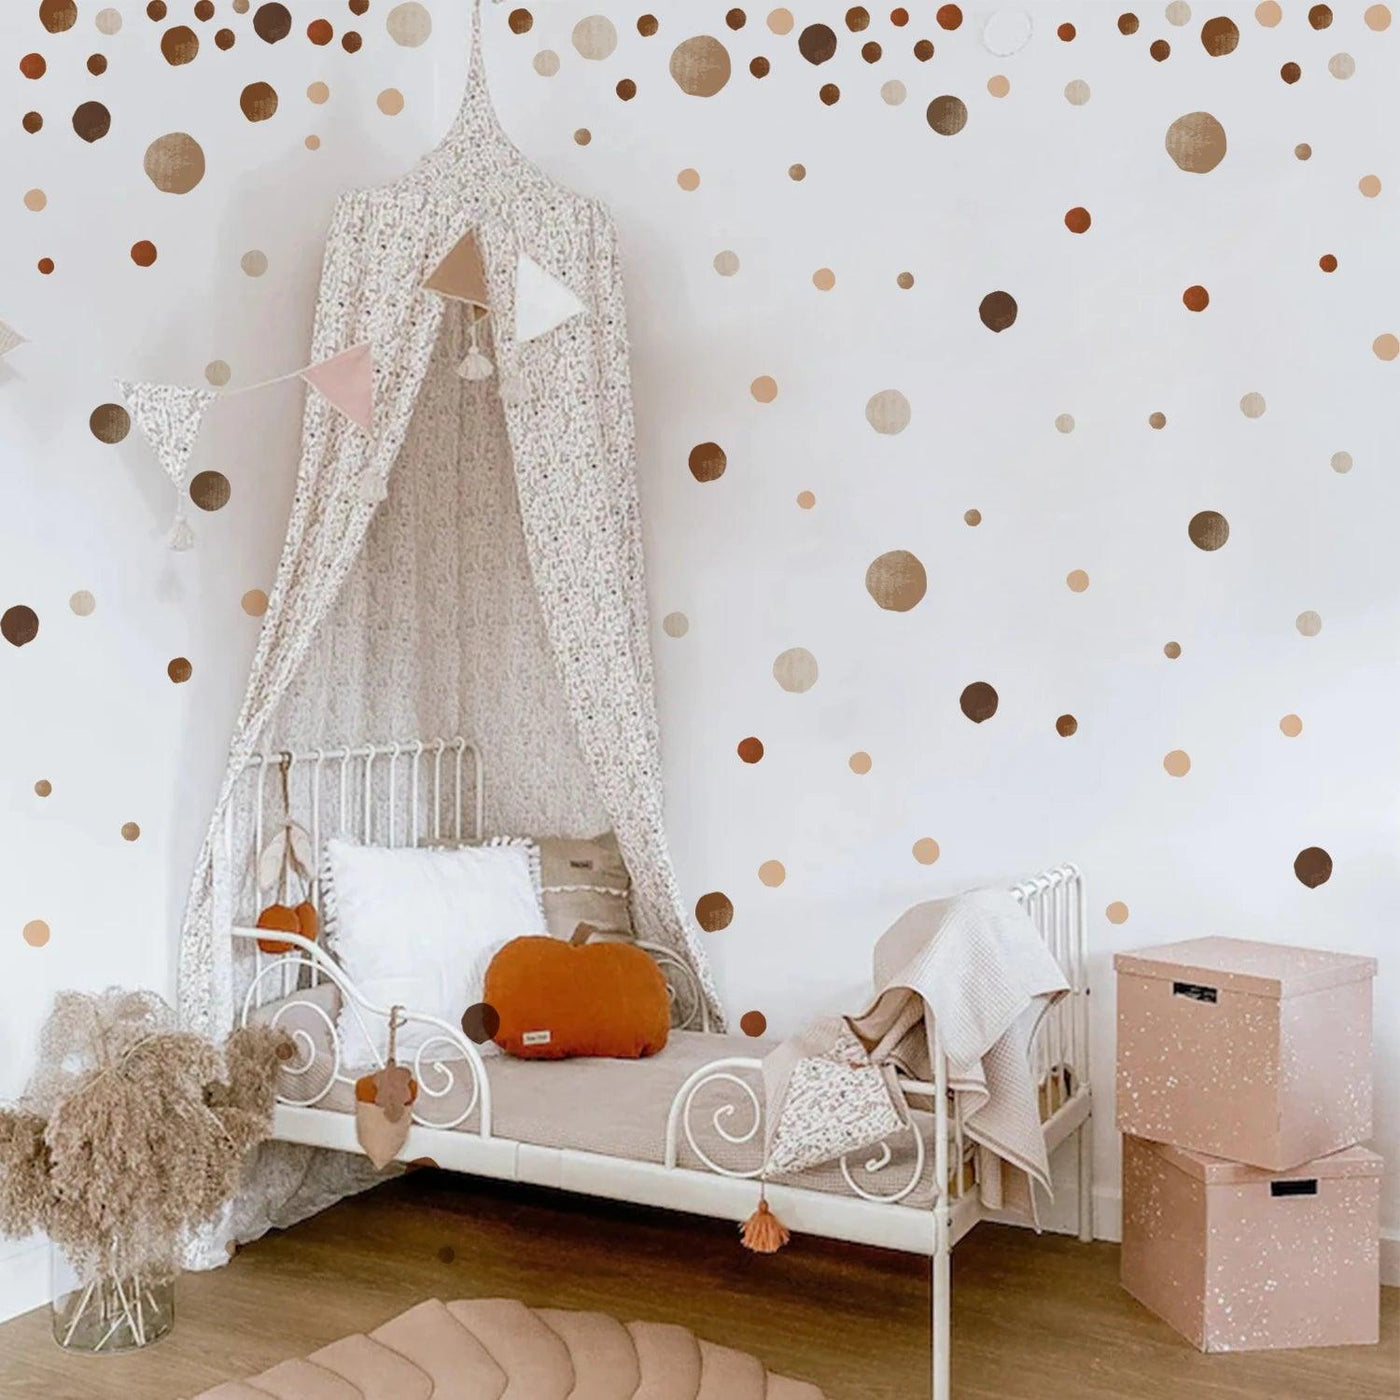 Funlife® 140 PCS Watercolor Boho Polka Dots Wall Decals Nursery Room Kids Bedroom Removable Peel and Stick Wall Stickers - Parker and Olive